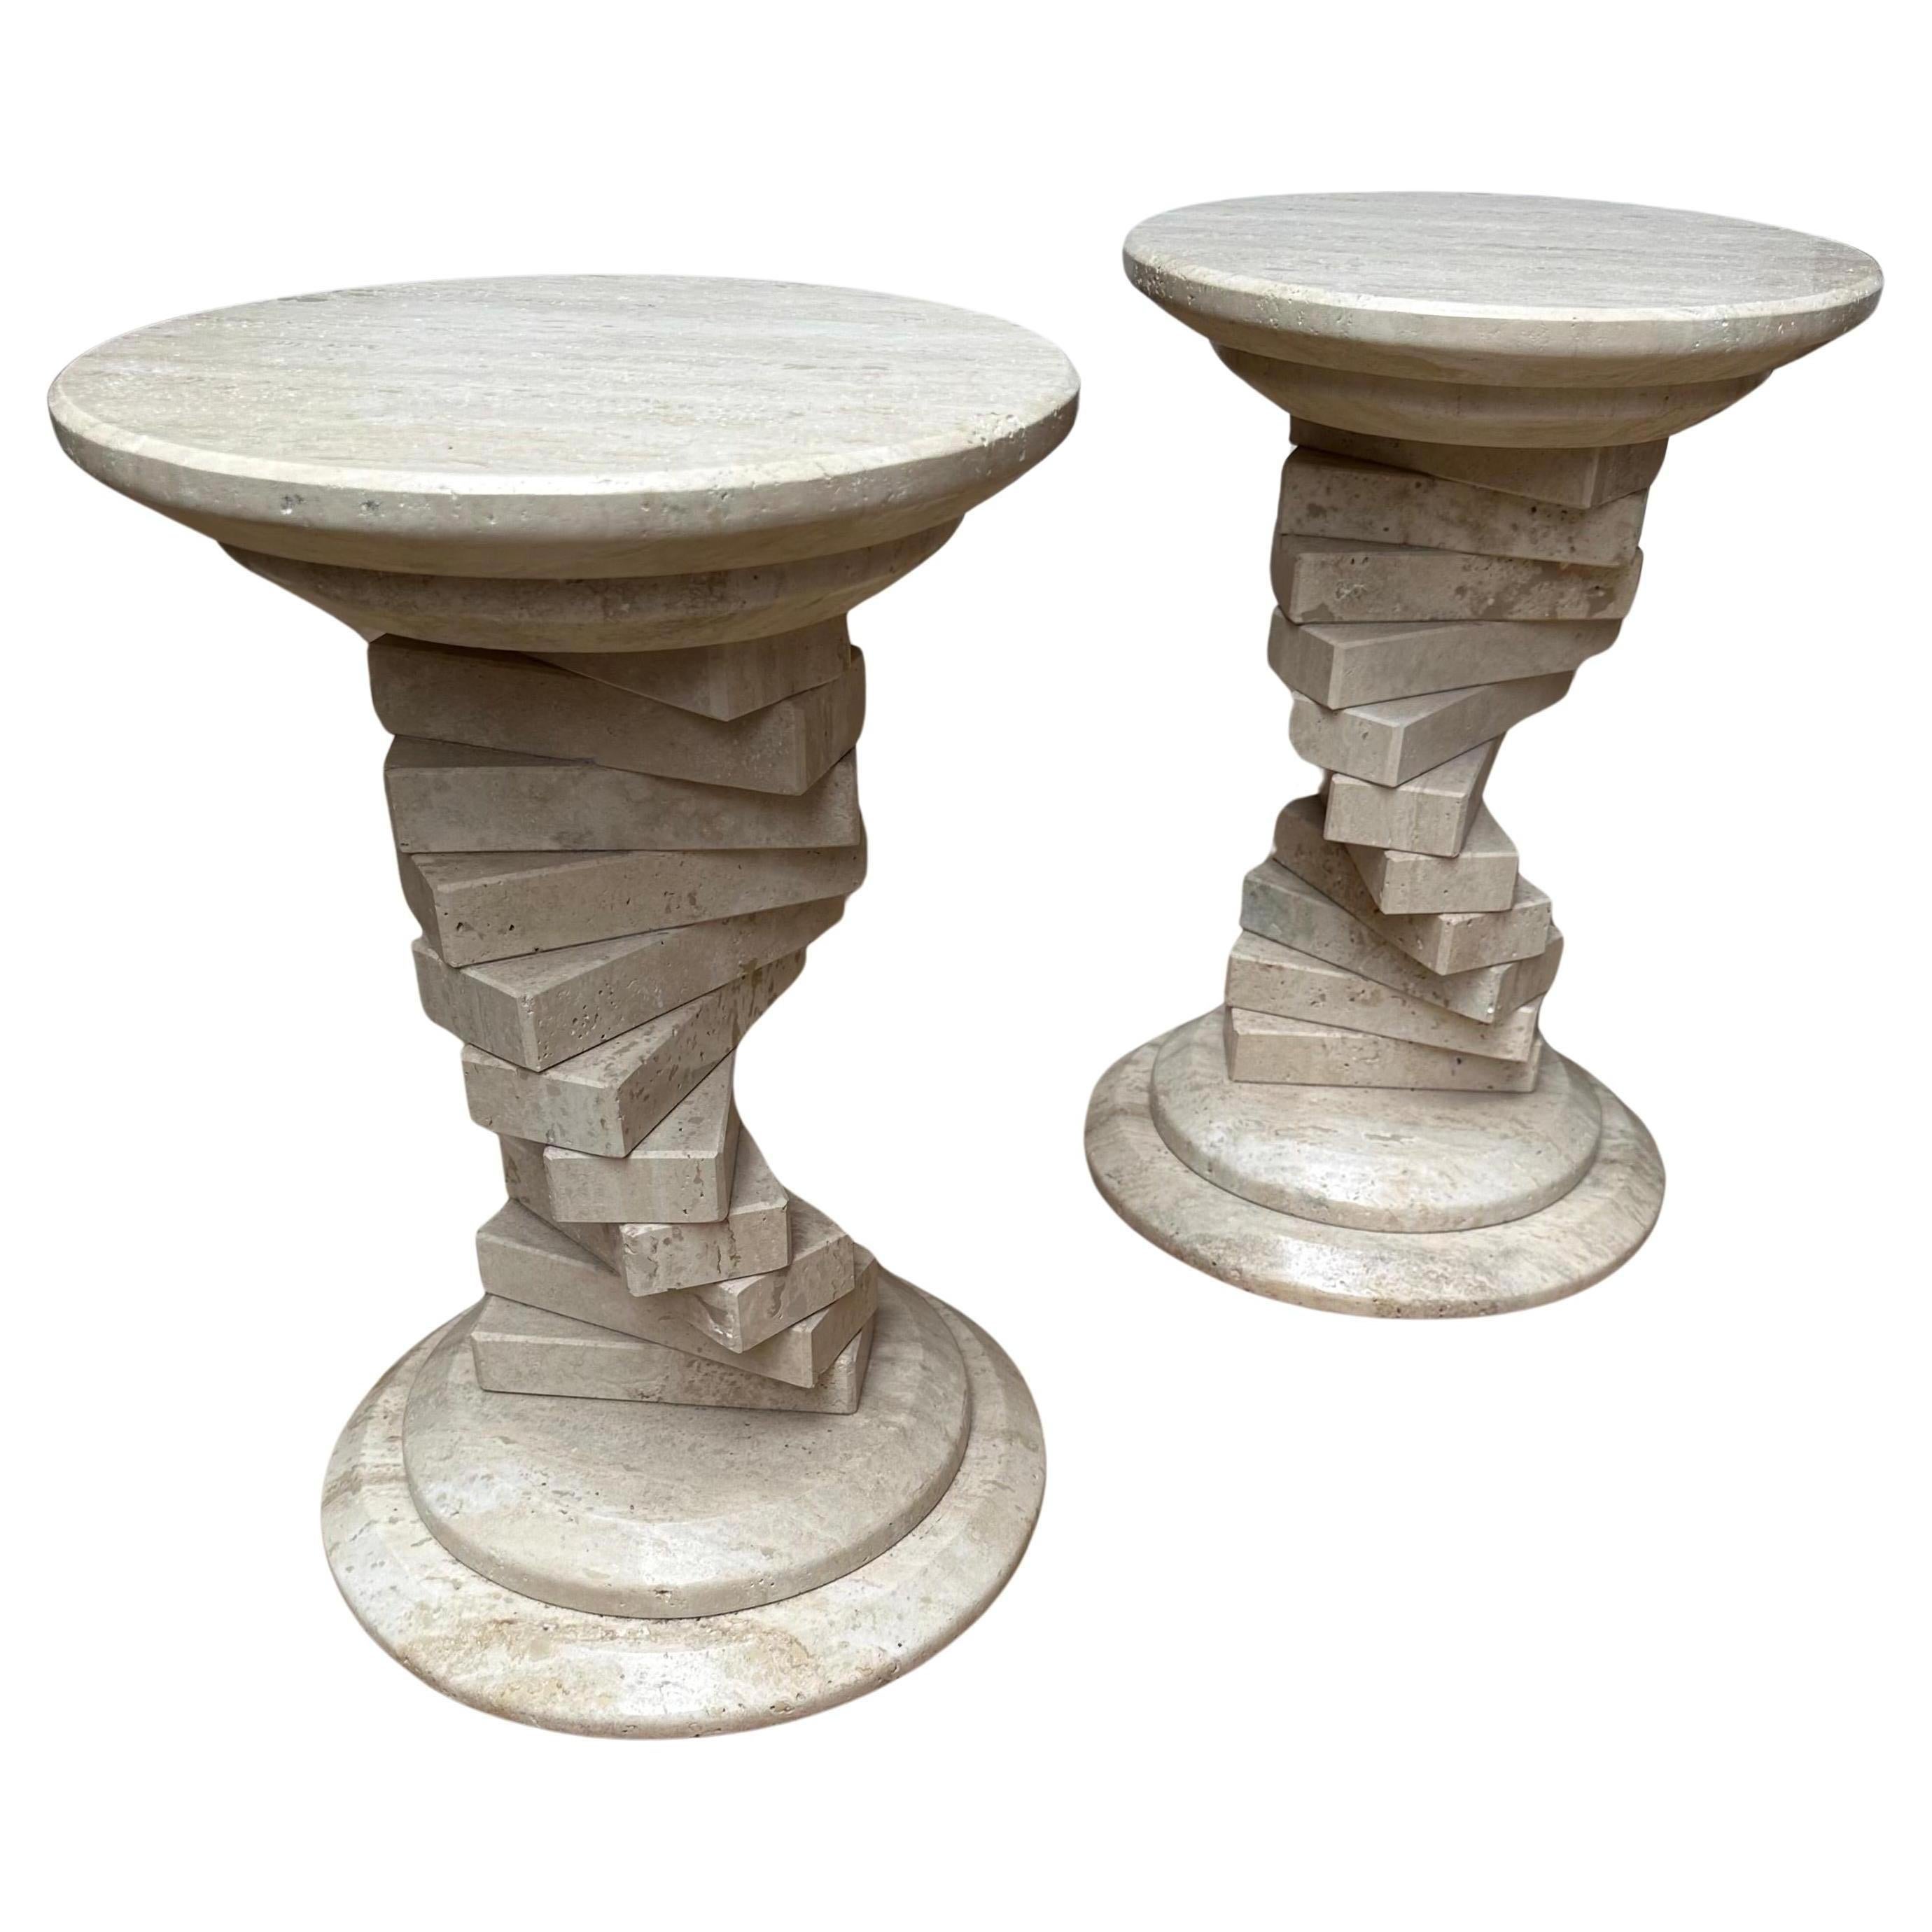 Stunning Pair of Italian Travertine Circular End Tables w. Stacked Blocks Design For Sale